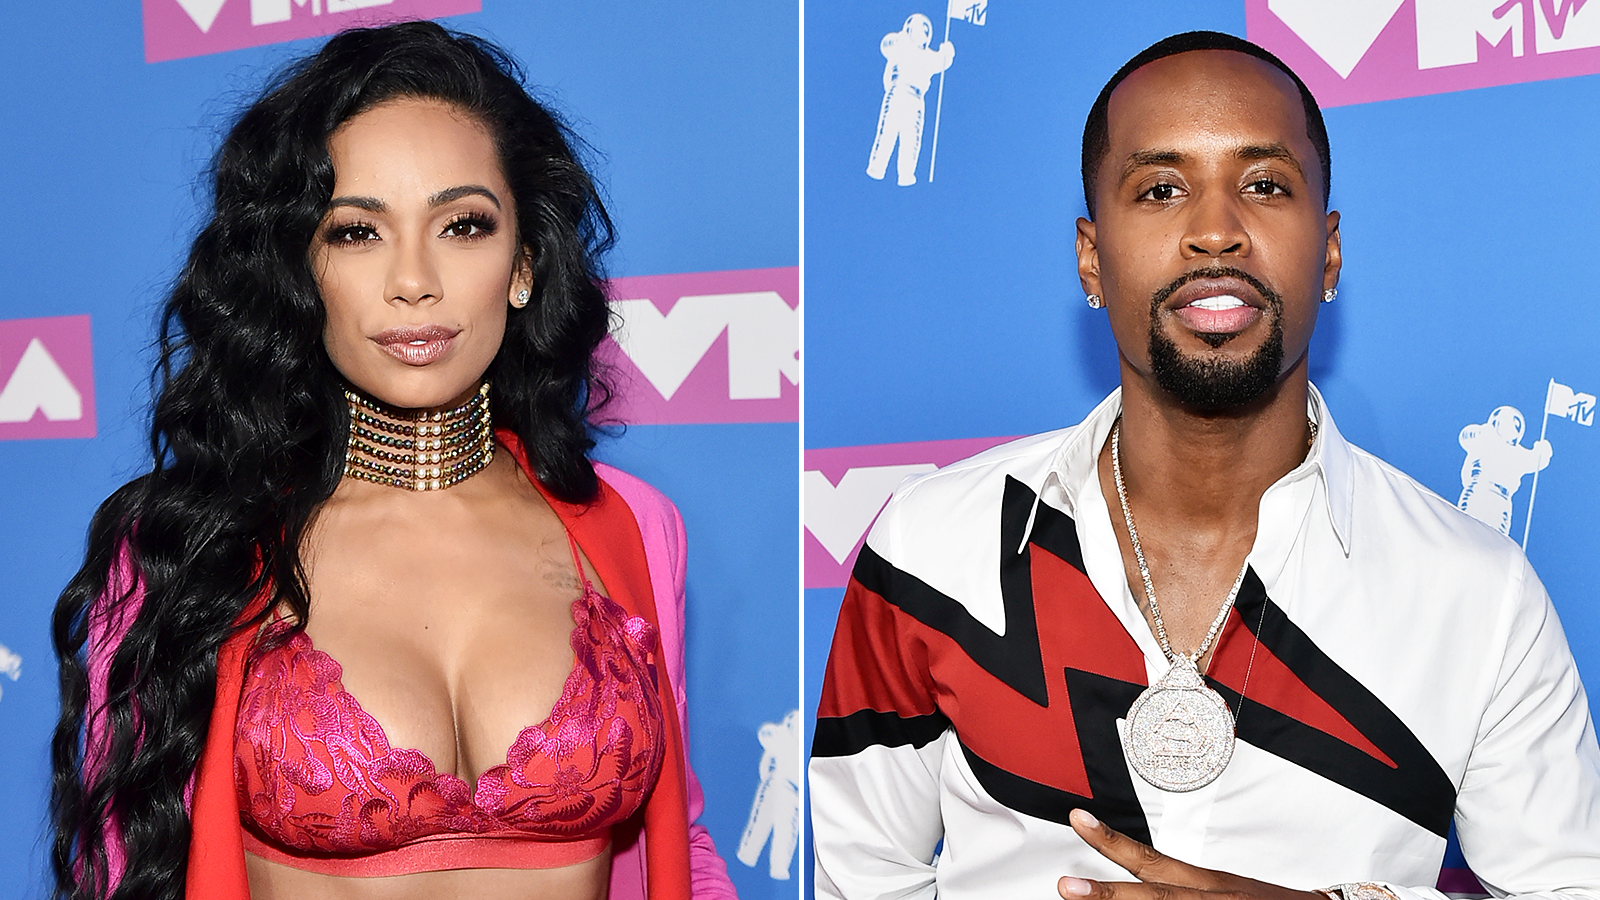 CAN'T KNOCK THE HUSTLE: Erica Mena & Safaree Release “X-Rated” Video of Her  “Satisfying Her Husband” & The Internet Goes Crazy – ItsKenBarbie